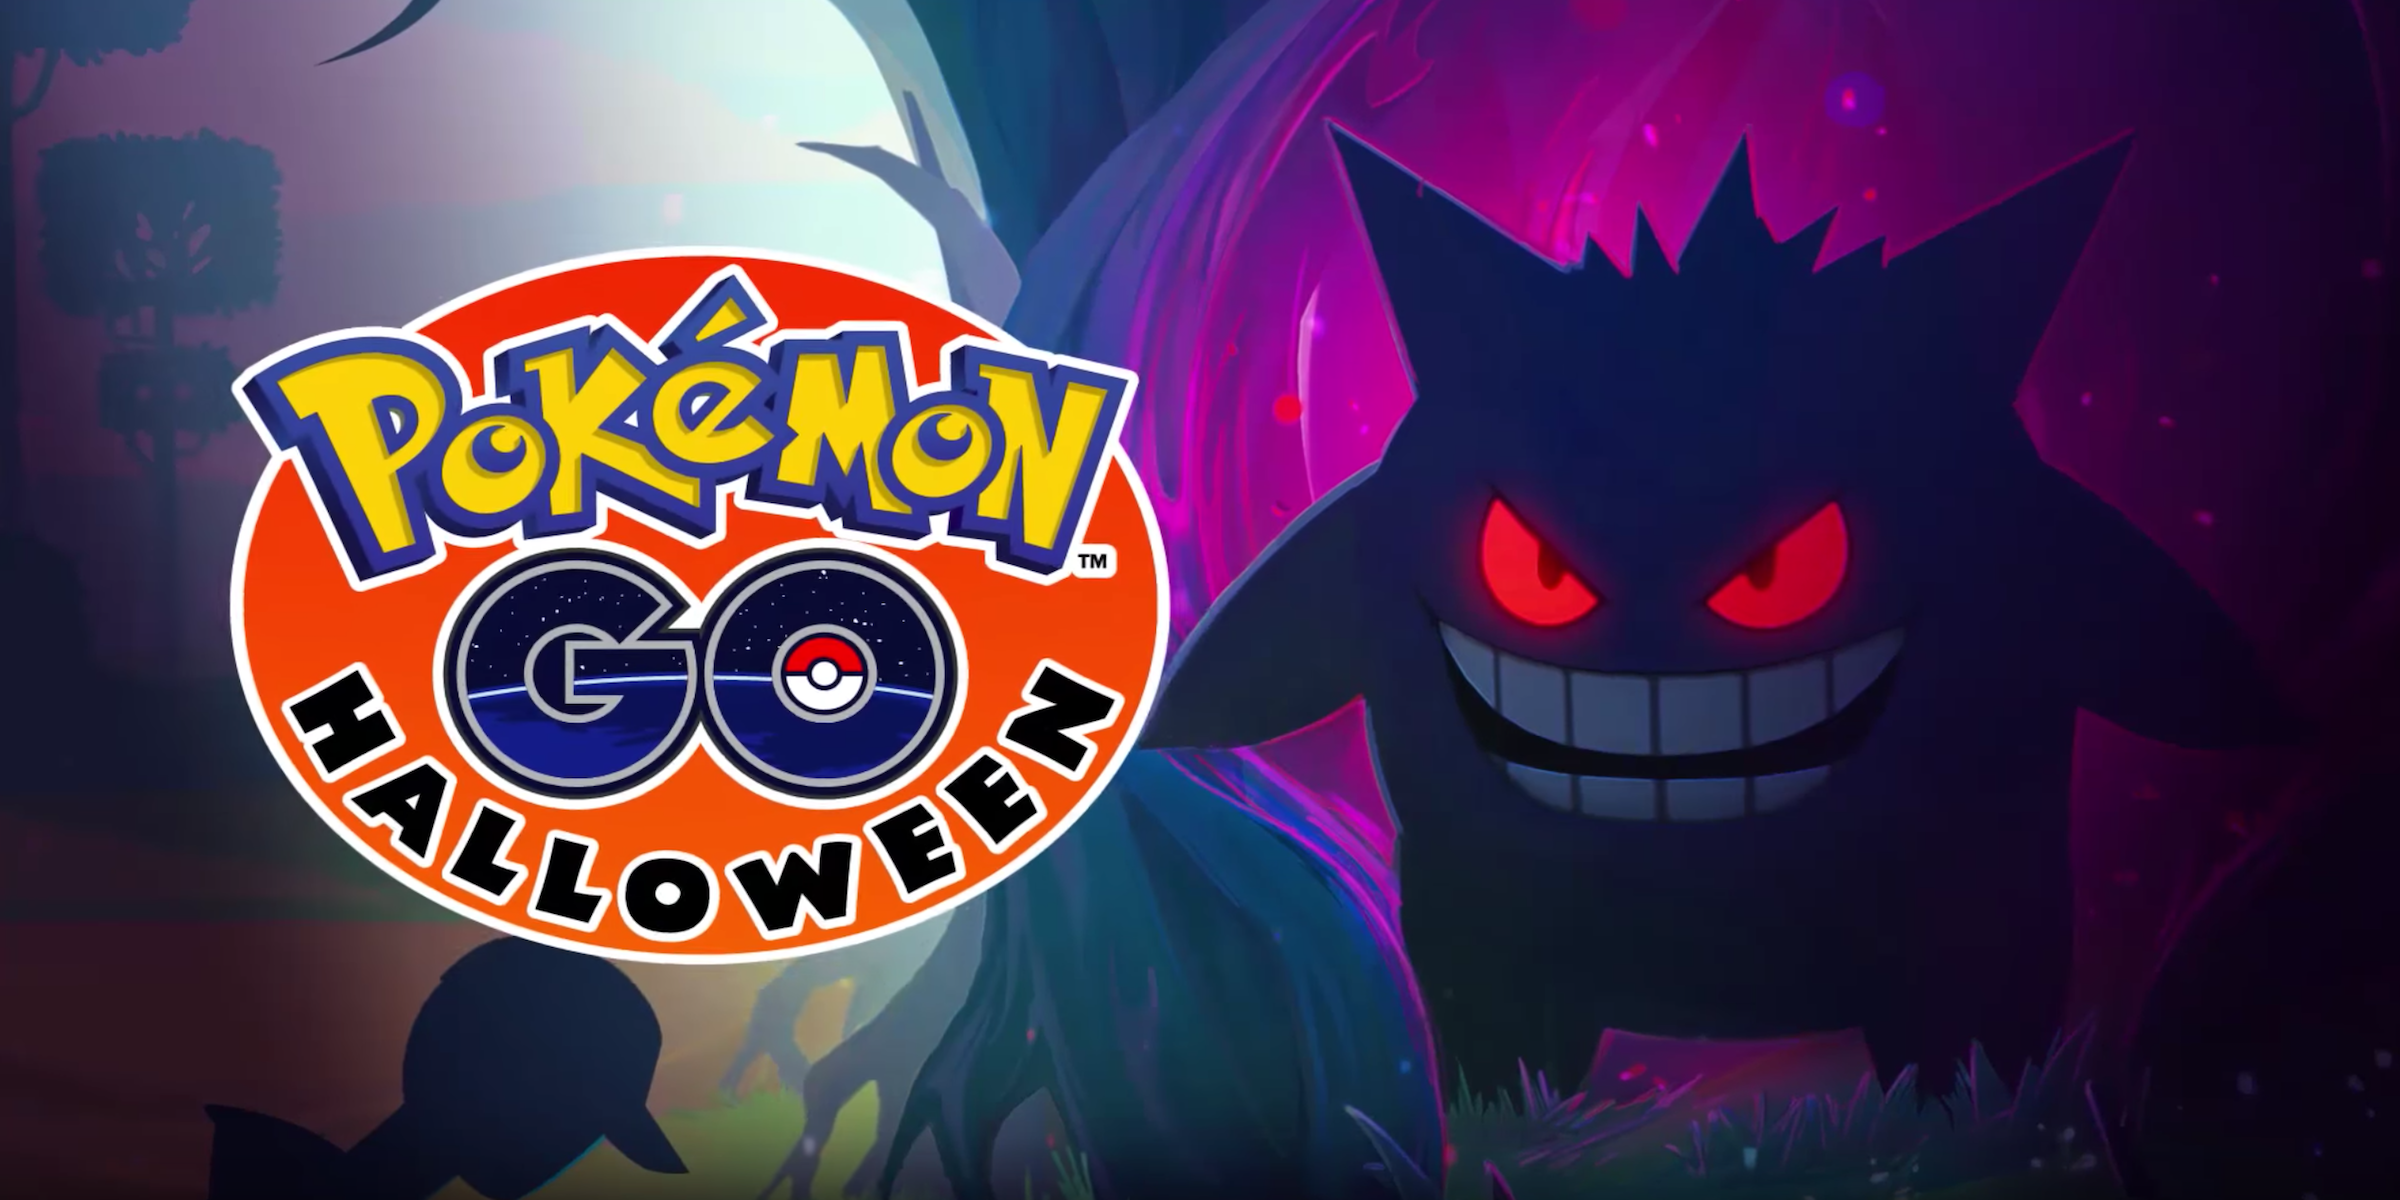 Pokemon Go schedules first ingame event for Halloween with player